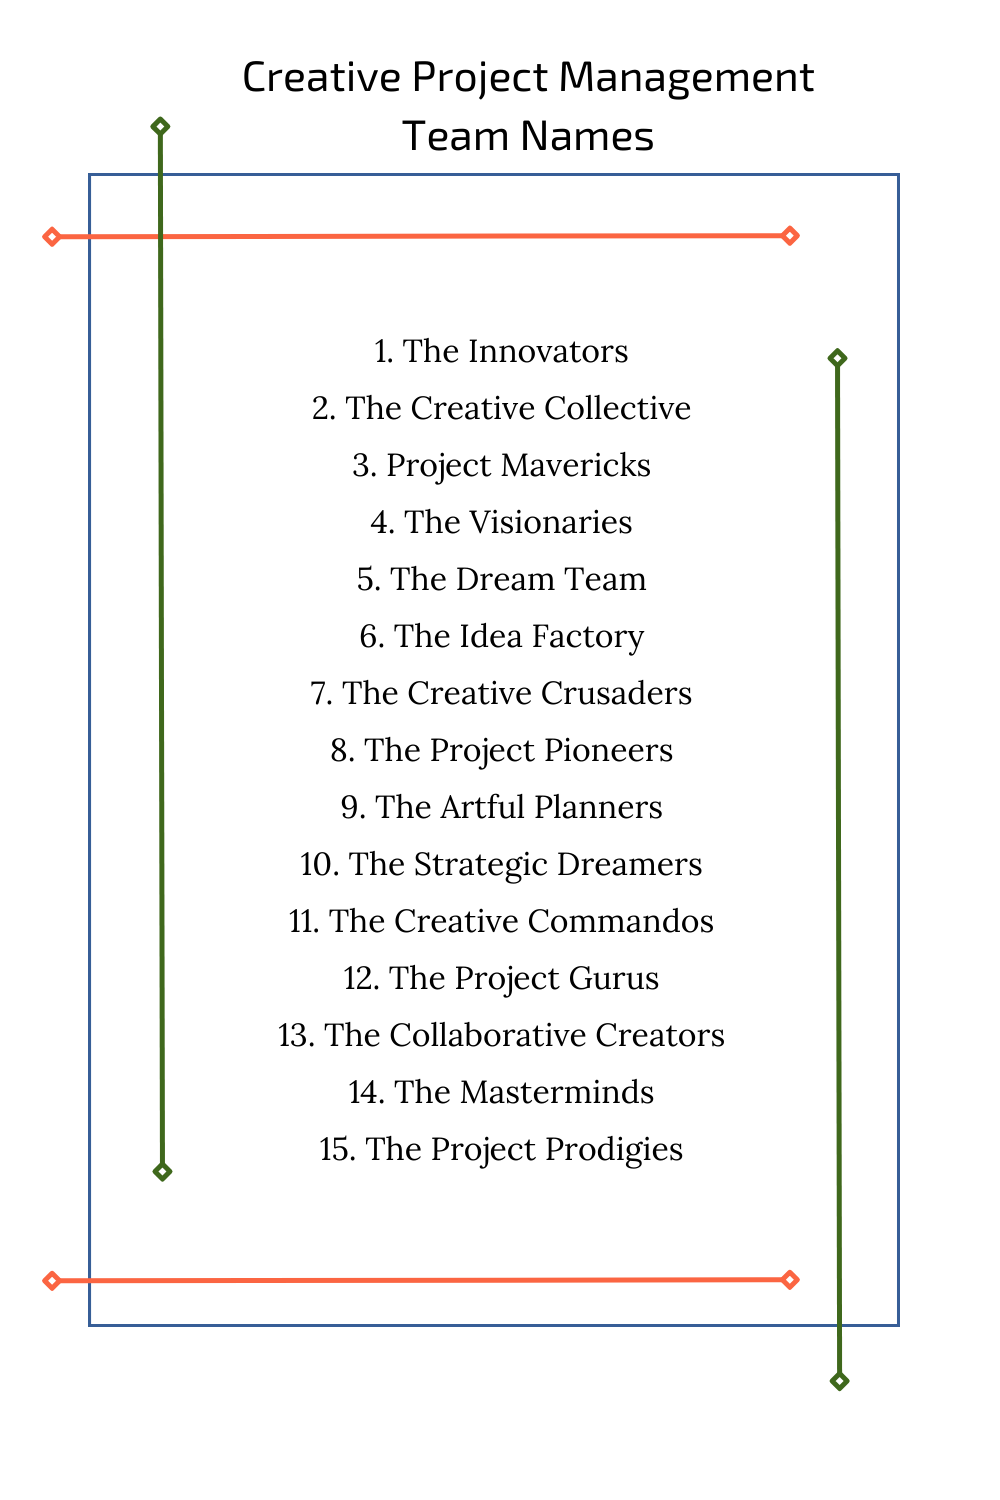 Creative Project Management Team Names